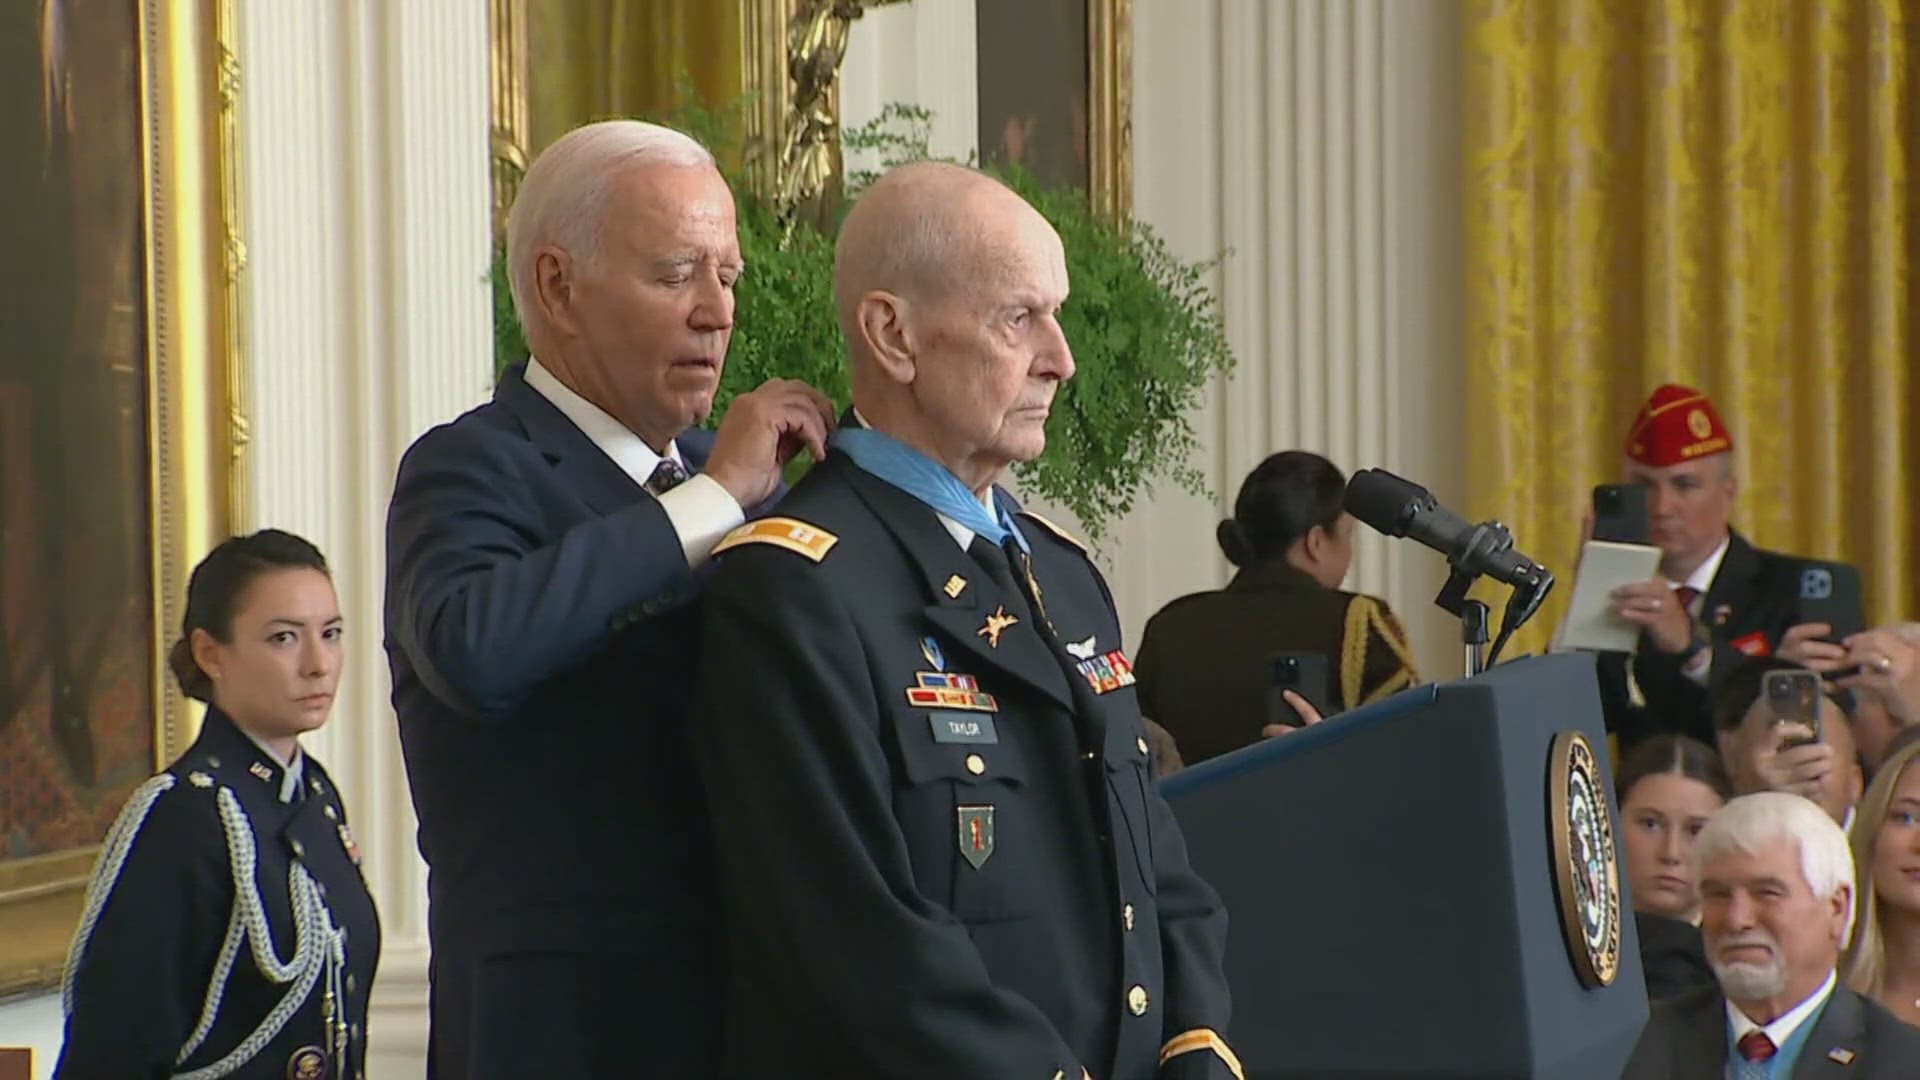 There are 15 medal of honor recipients from East Tennessee and more than 3,500 from across the country.